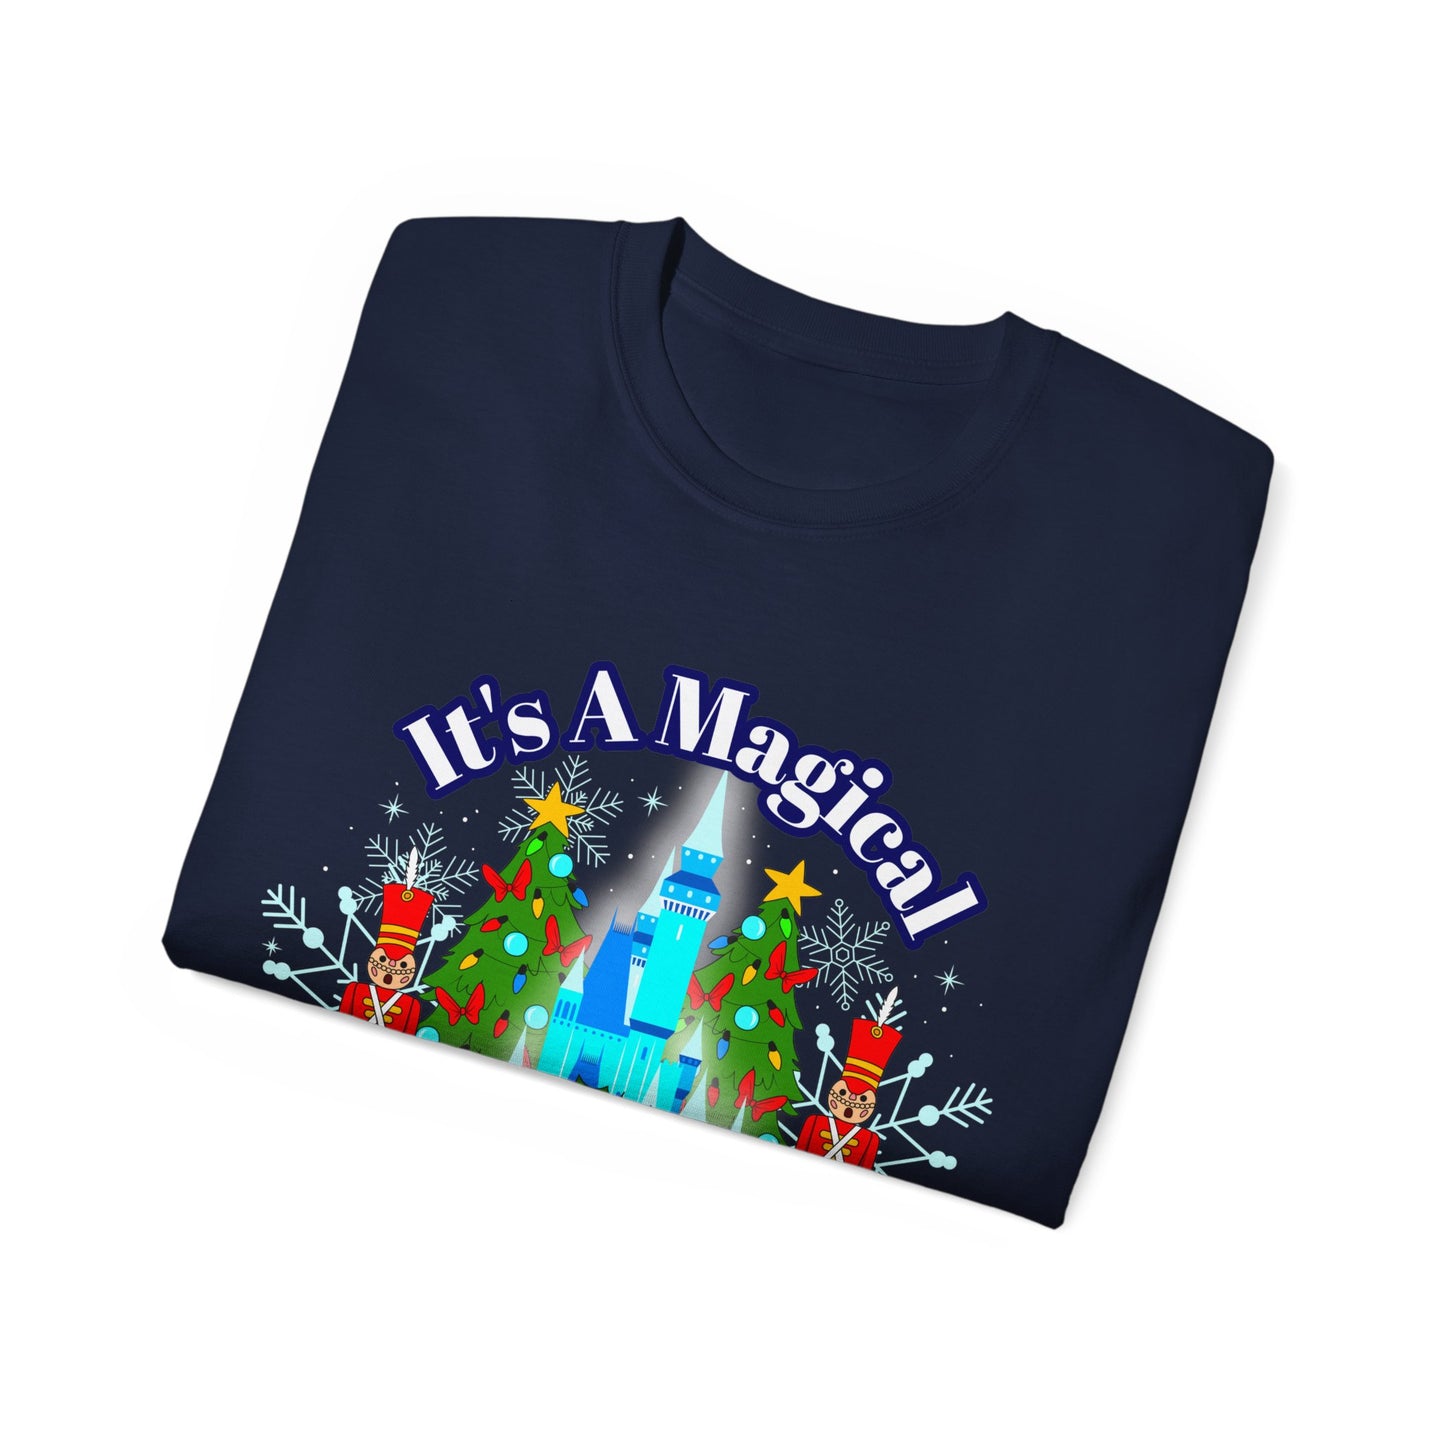 Magical Christmas Unisex Graphic Tee